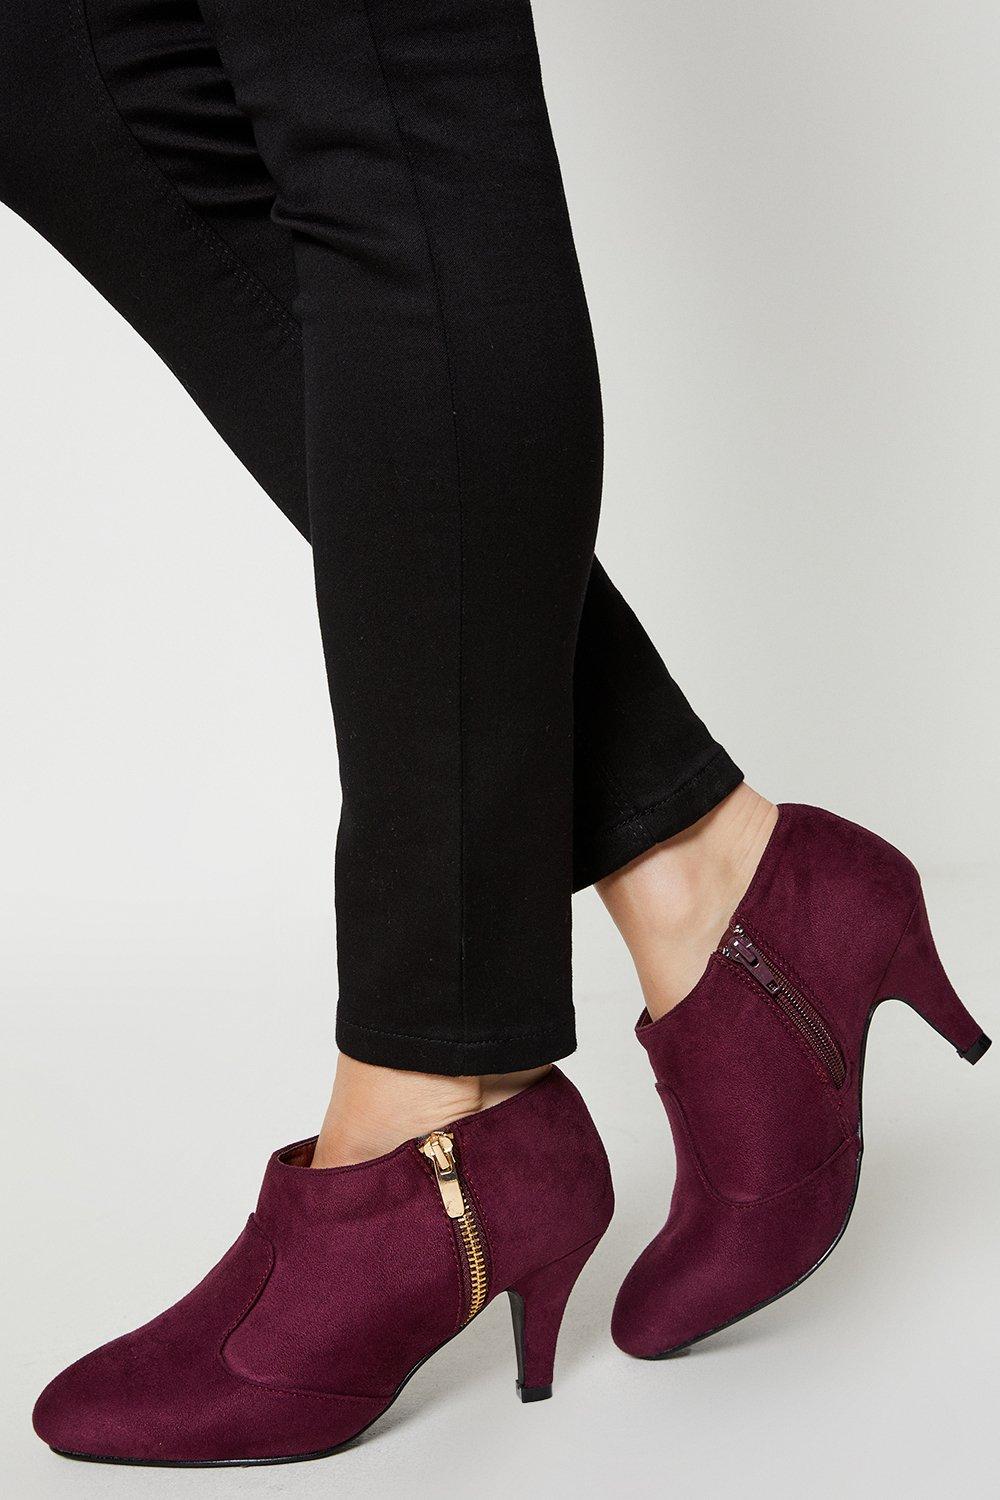 Women's Good For The Sole: Wide Fit Marley Comfort Zip Heeled Ankle Boots - burgundy - 3